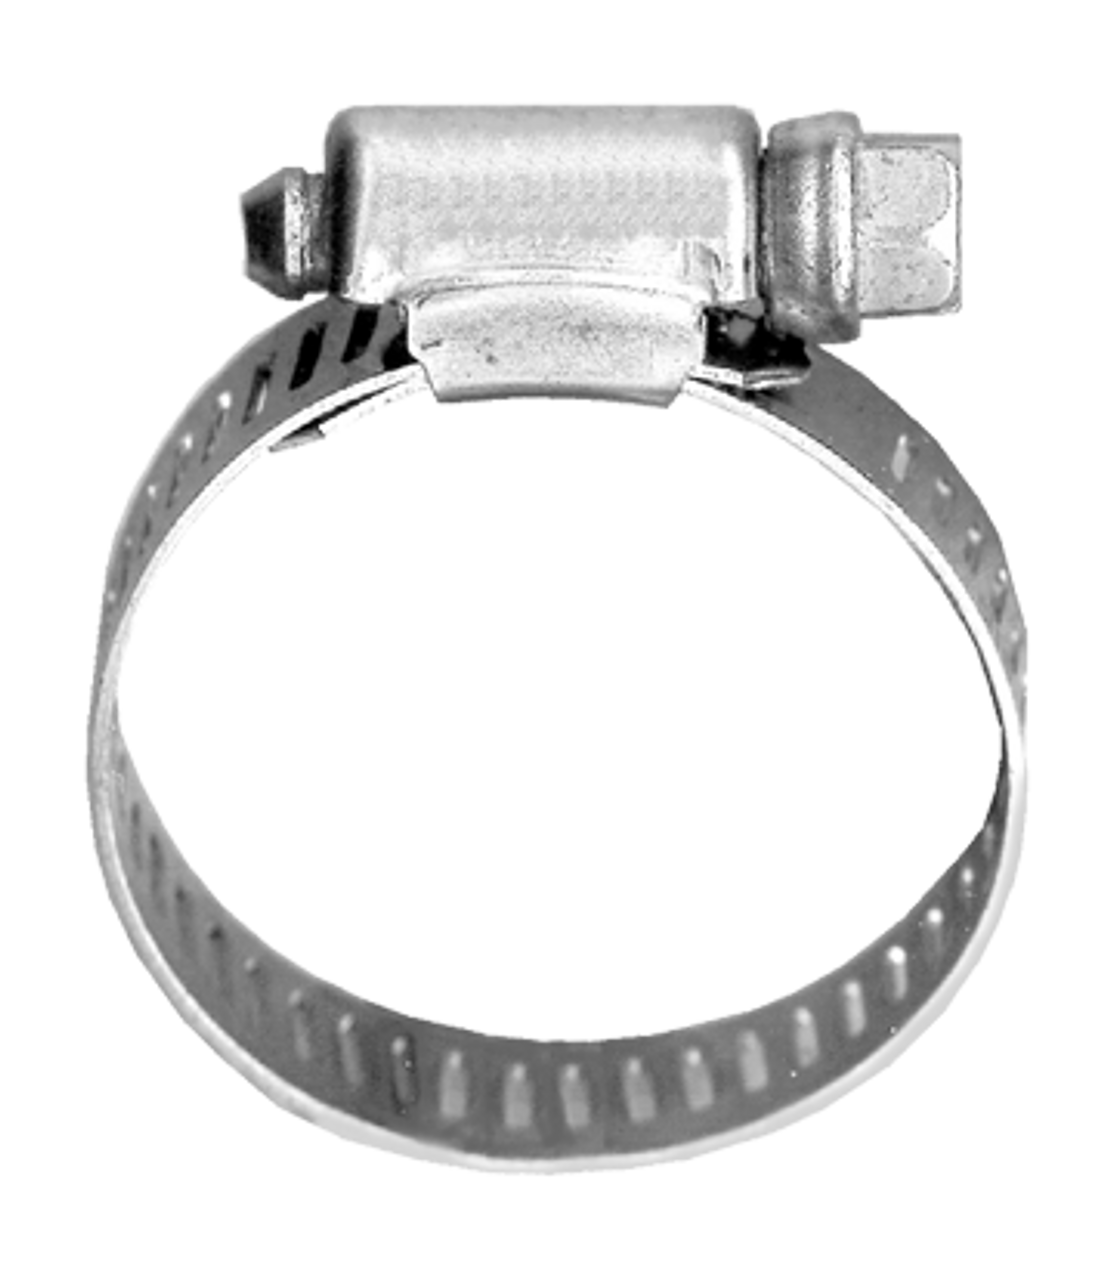 5-1/4" Standard Gear Clamp - S/S Band - S/S Screw  HC5-84